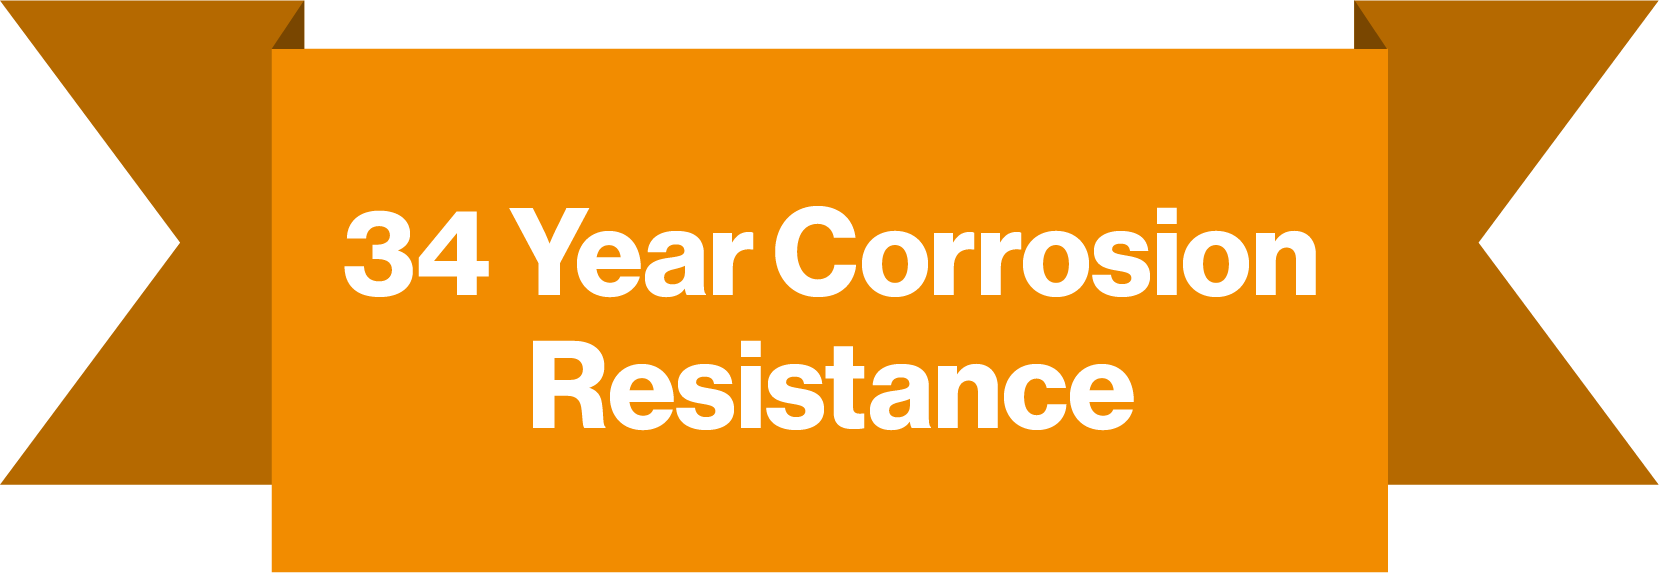 34 year corrosion resistance